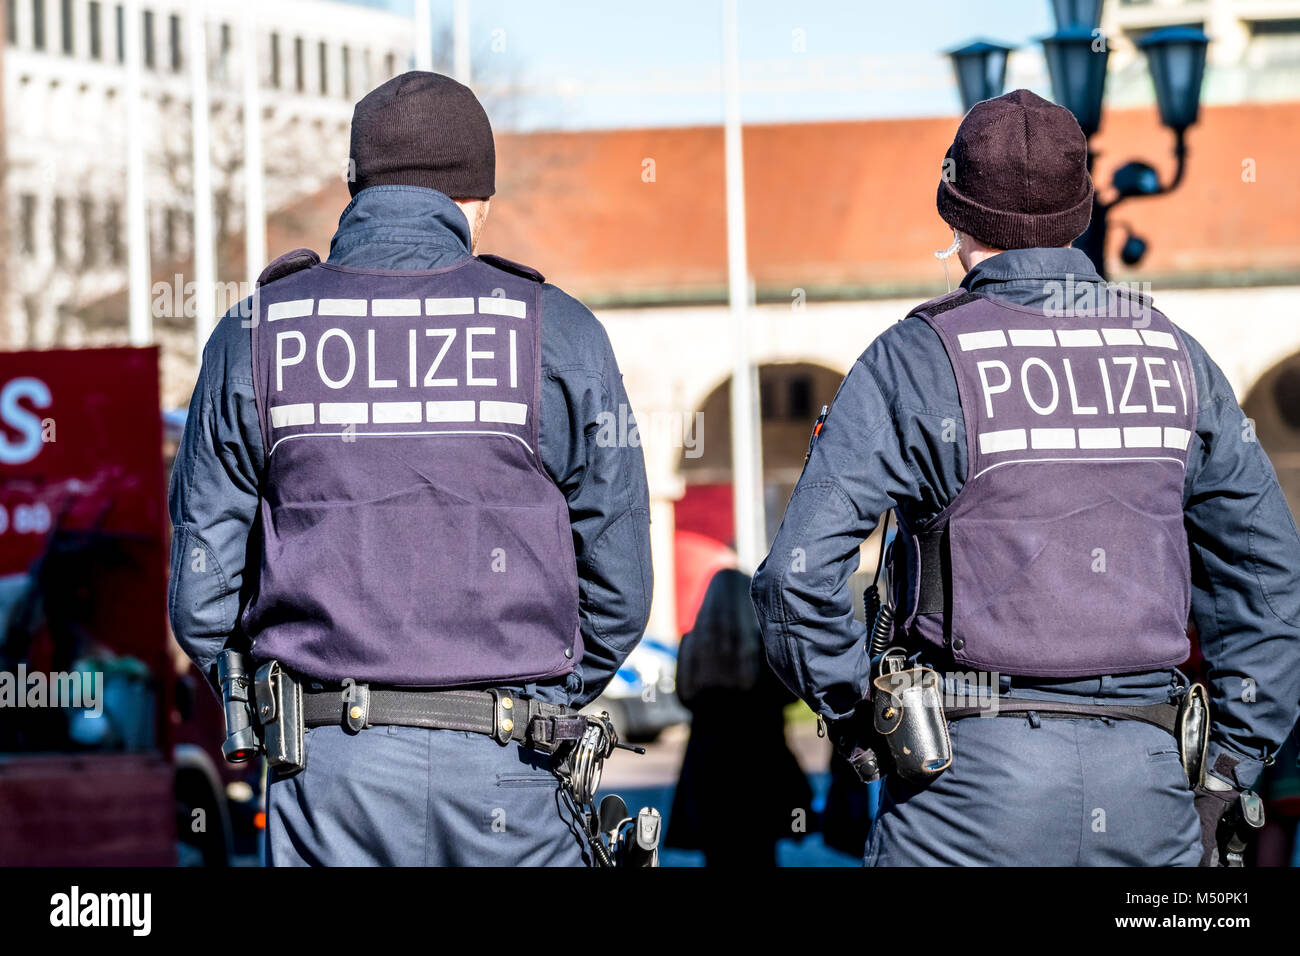 Federal police officer protecting the city in Germany Stock Photo